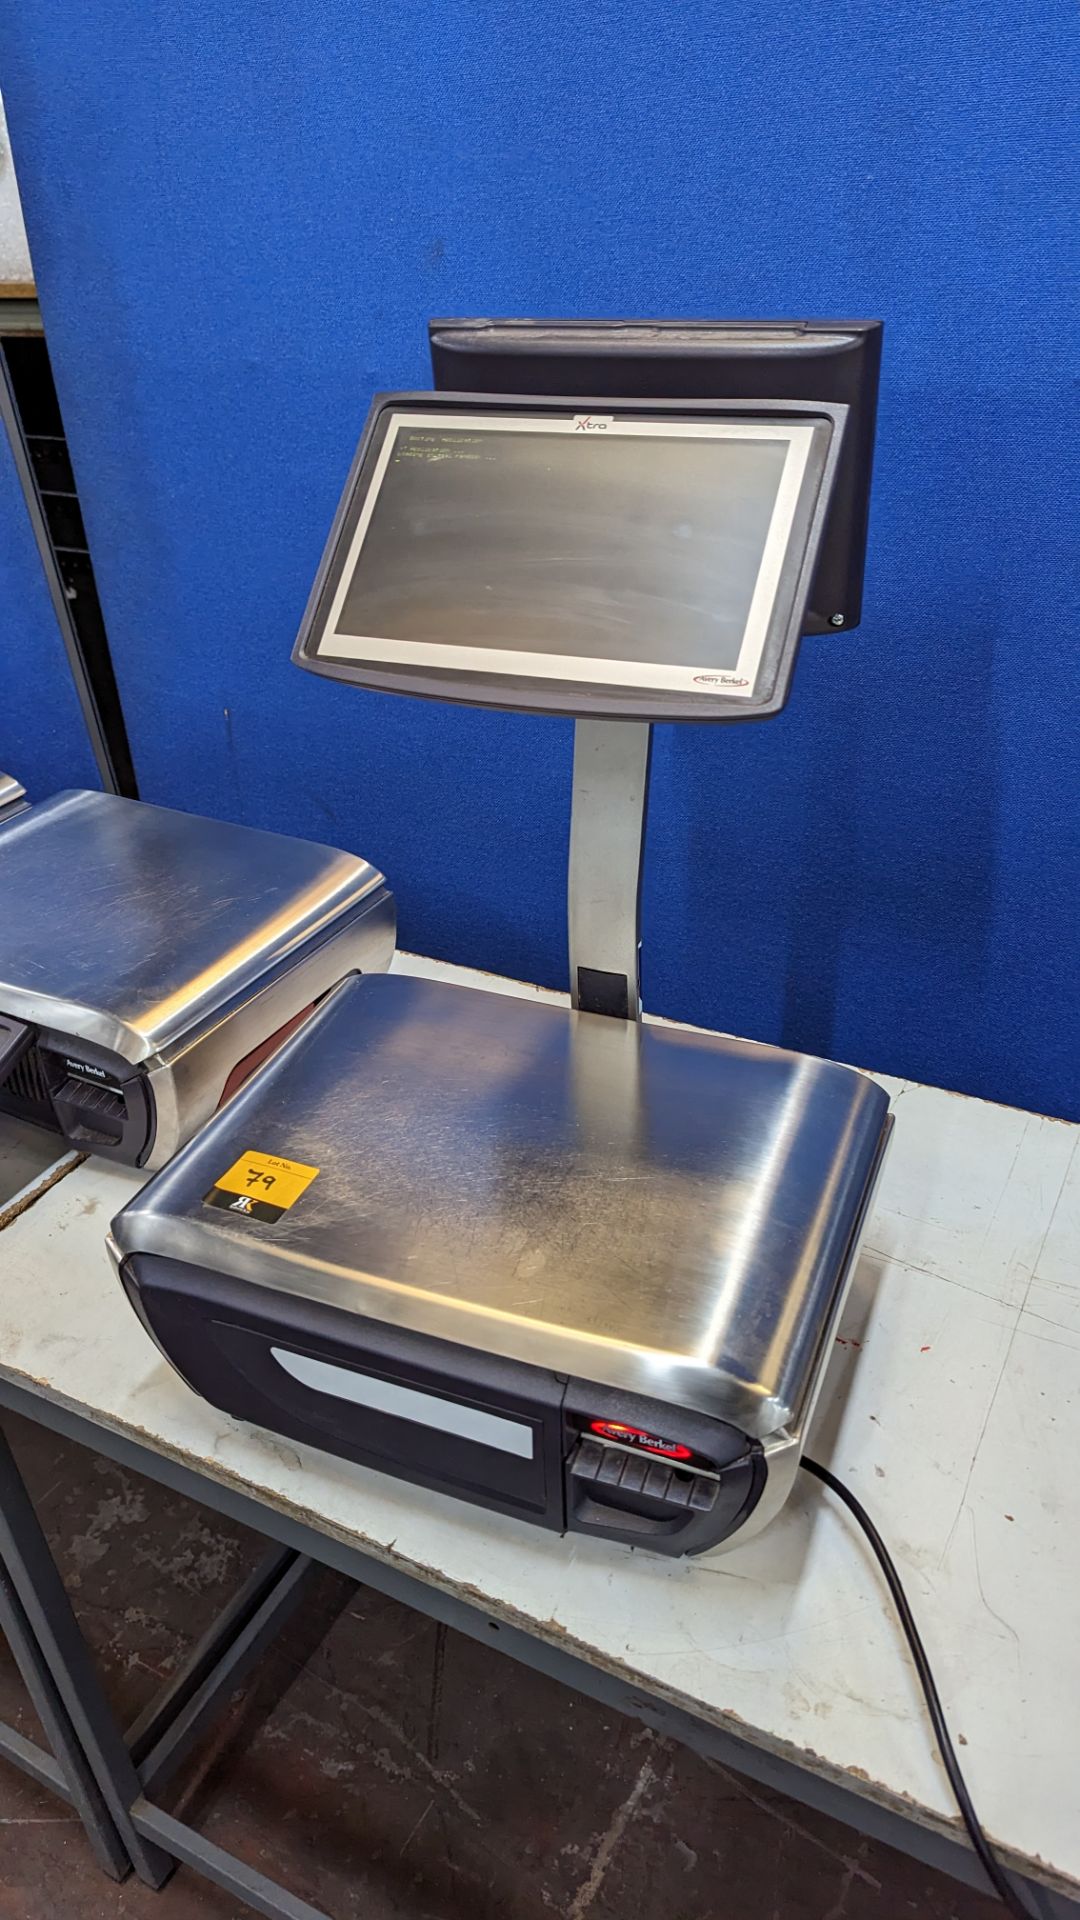 Avery Berkel Xti 400 Label & Receipt printing scale. 6kg/15kg capacity. These scales include a 10" - Image 4 of 17